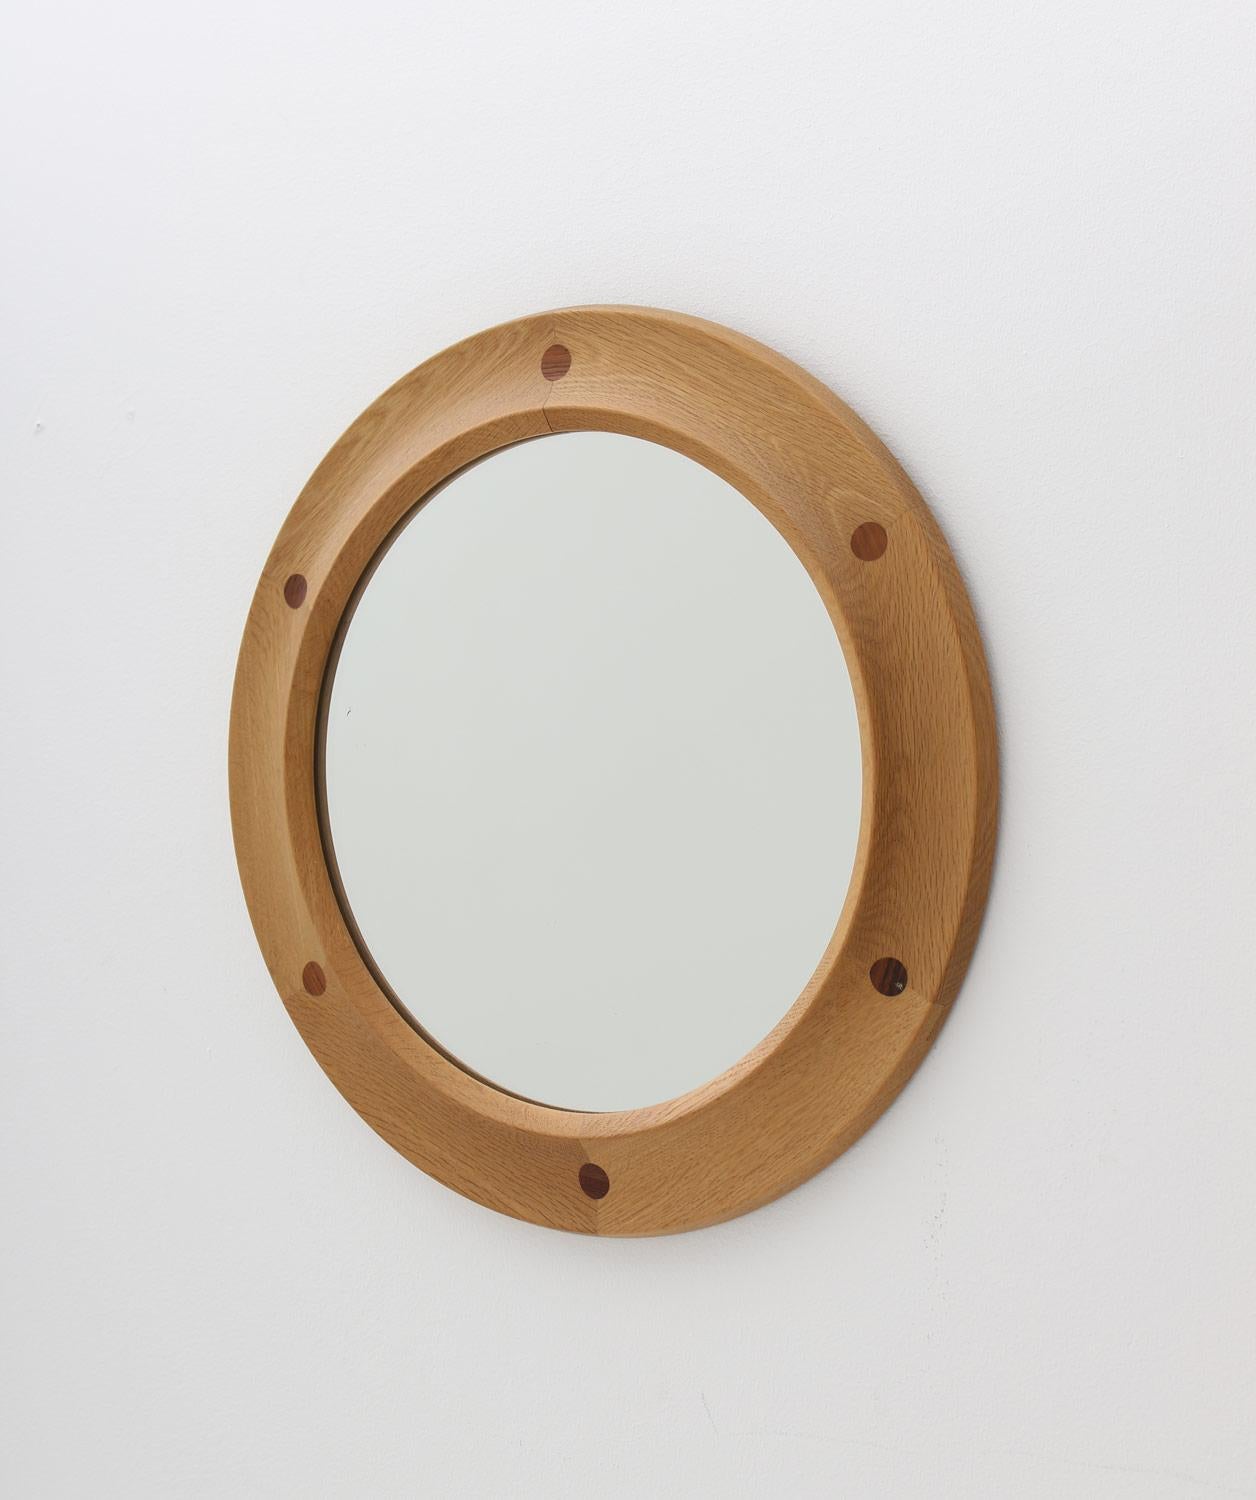 Beautiful midcentury round mirror by Nybrofabriken Fröseke, Sweden.
The mirror is made in oak with beautiful details in rosewood. 
Condition: Excellent condition on the frame, minimal signs of age on the mirror glass.
 